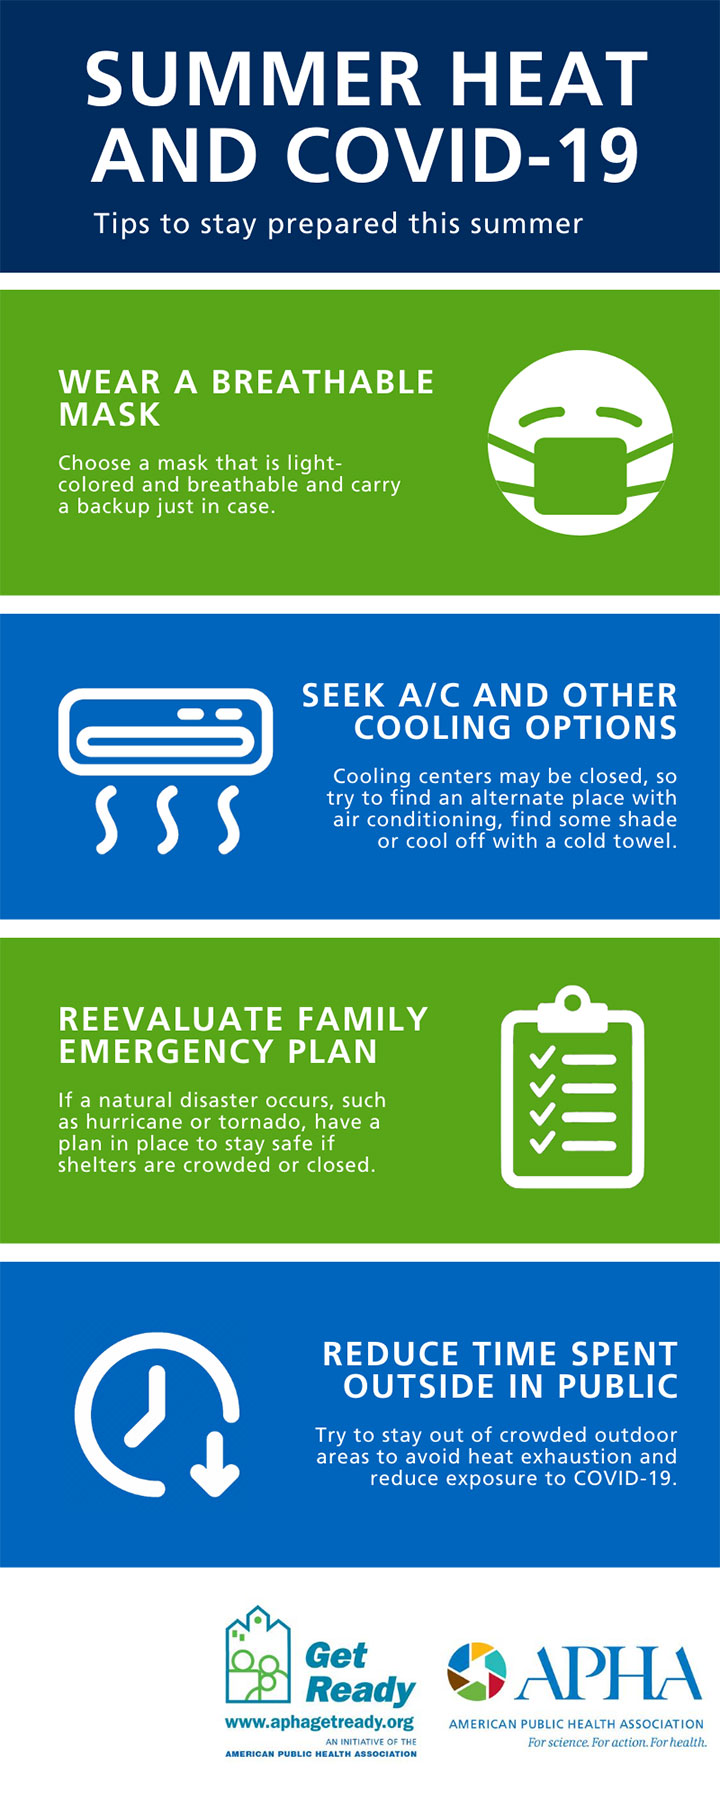 Summer Heat and COVID-19: Tips to stay prepared wear a breathable mask, seek a/c and other cooling options, re-evaluate family emergency plan, reduce time spent outside in public